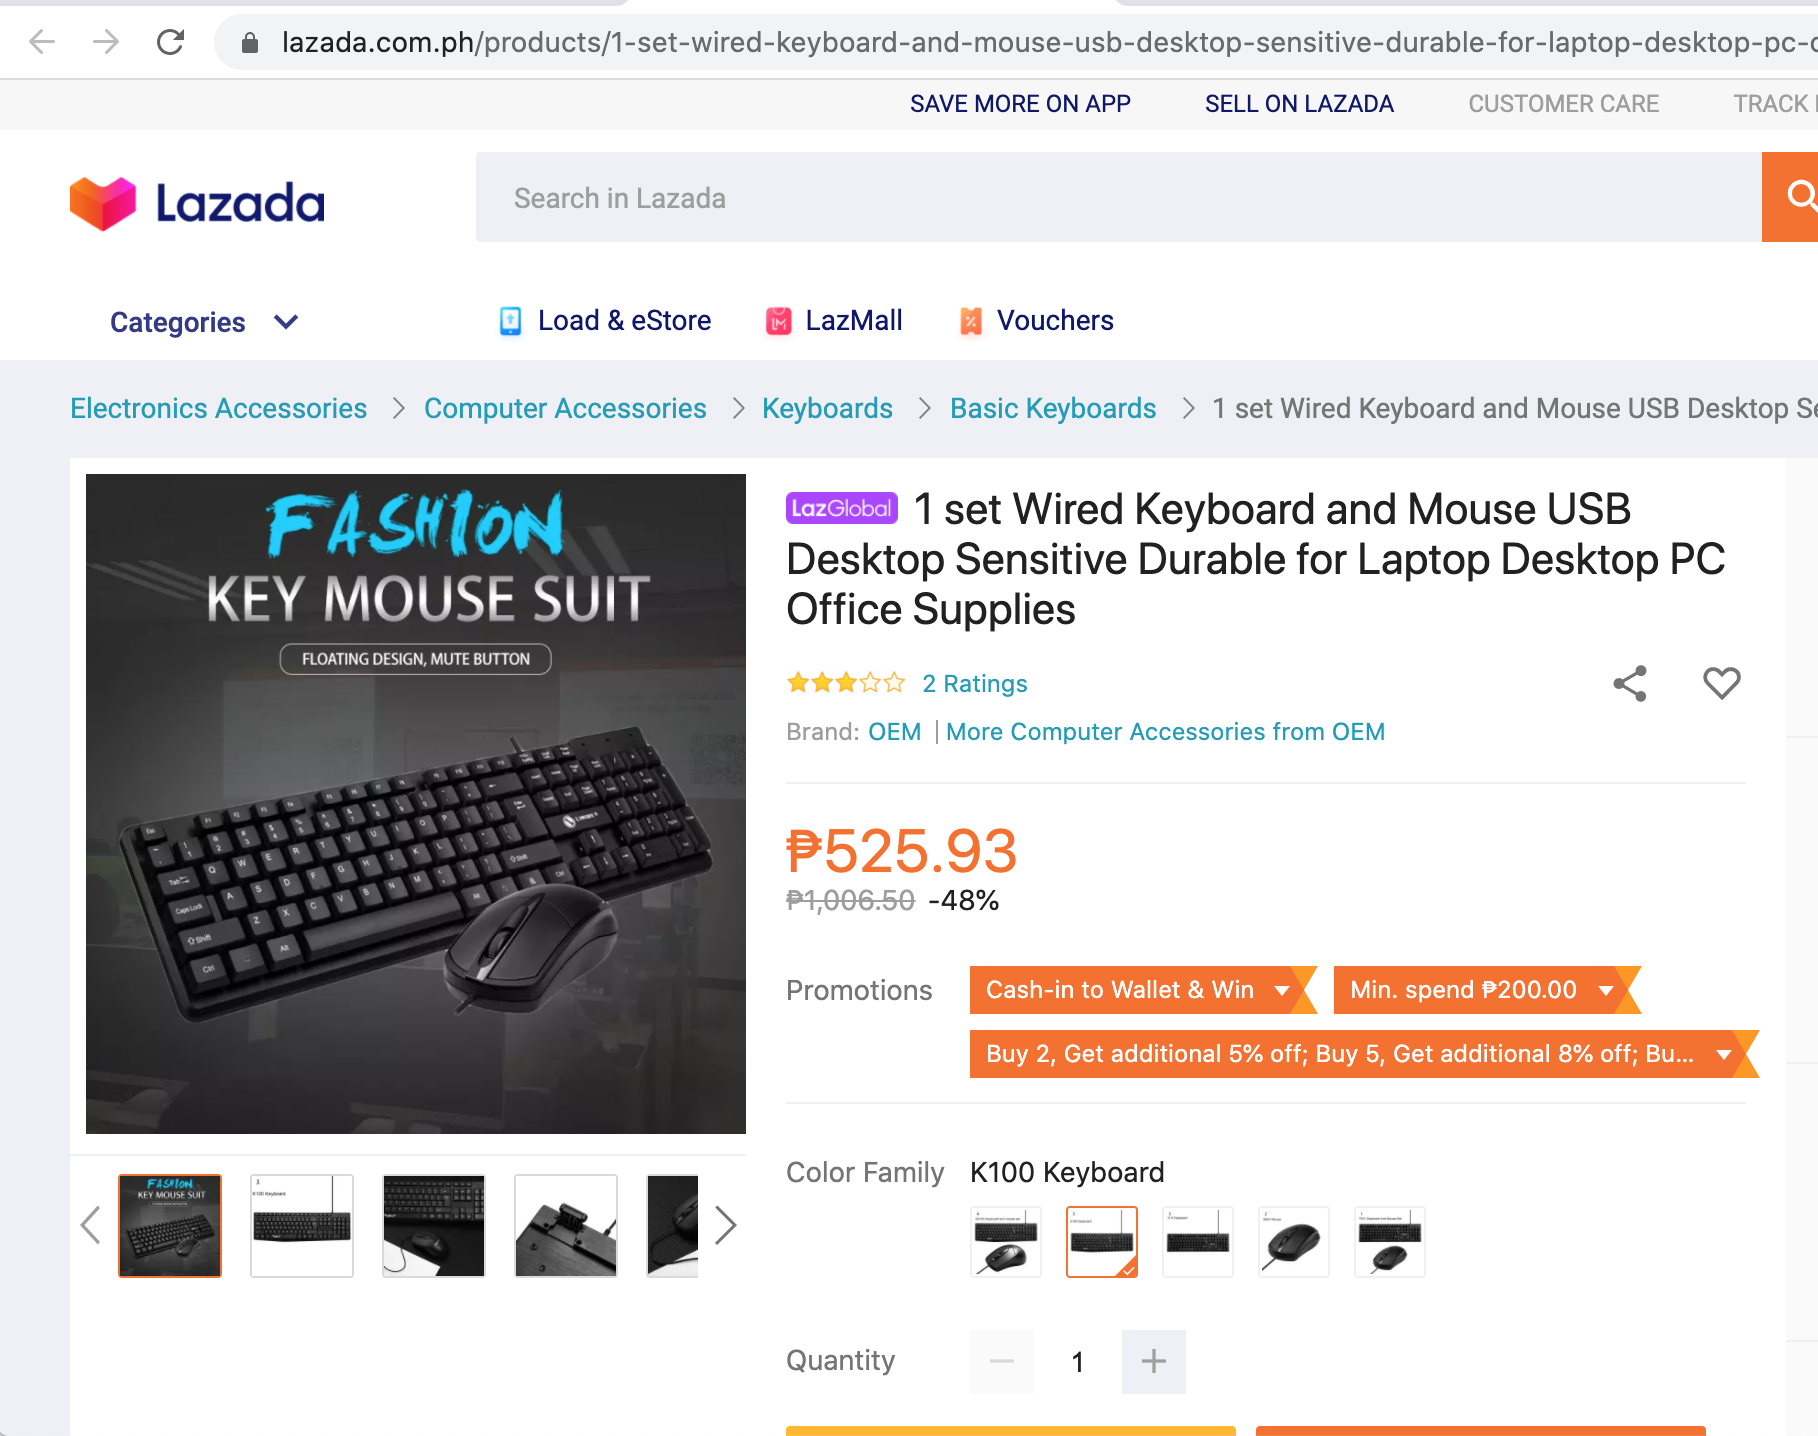 Keyboard2 with a different price